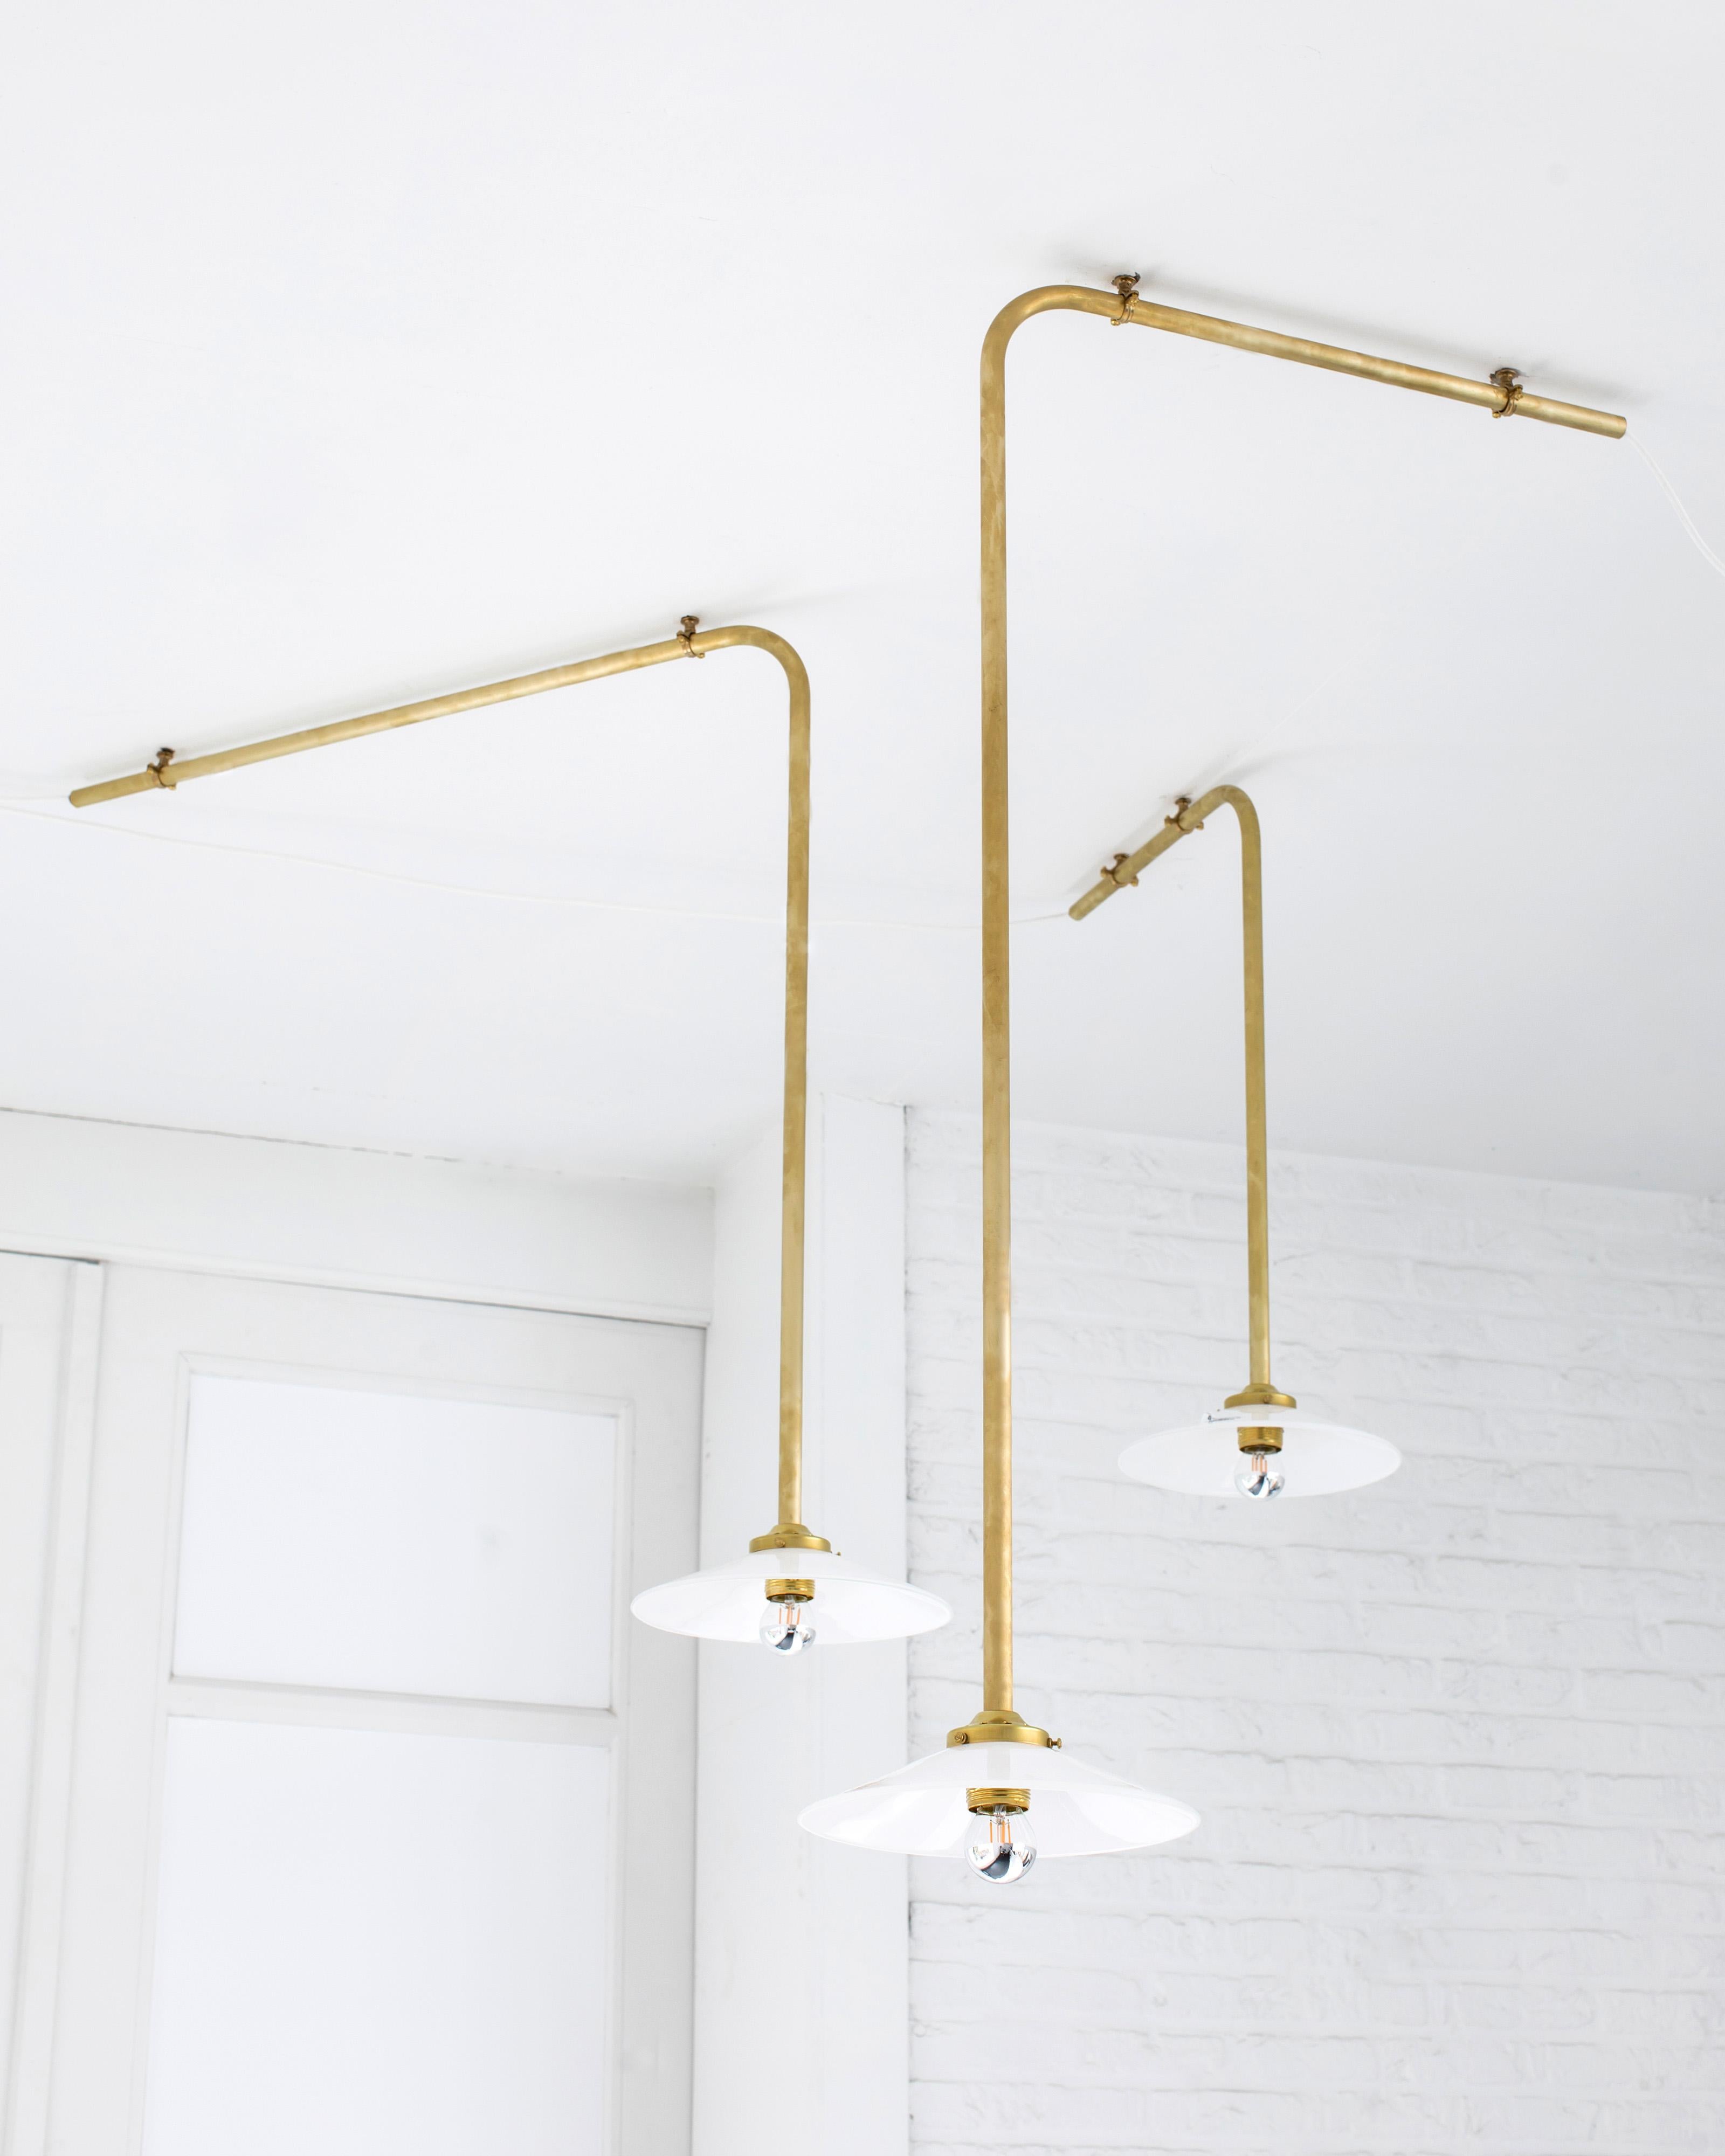 Cailing Lamp N°3 by Muller Van Severen x Valerie Objects

Dimensions: H. 73 X 52 X 25
Finish: Brass

specifications
fitting type: e27
bulb replaceable: yes
number of fittings: 1
dimmable: no
cable length: 3 meter
switch: no

material: 
— lamp frame